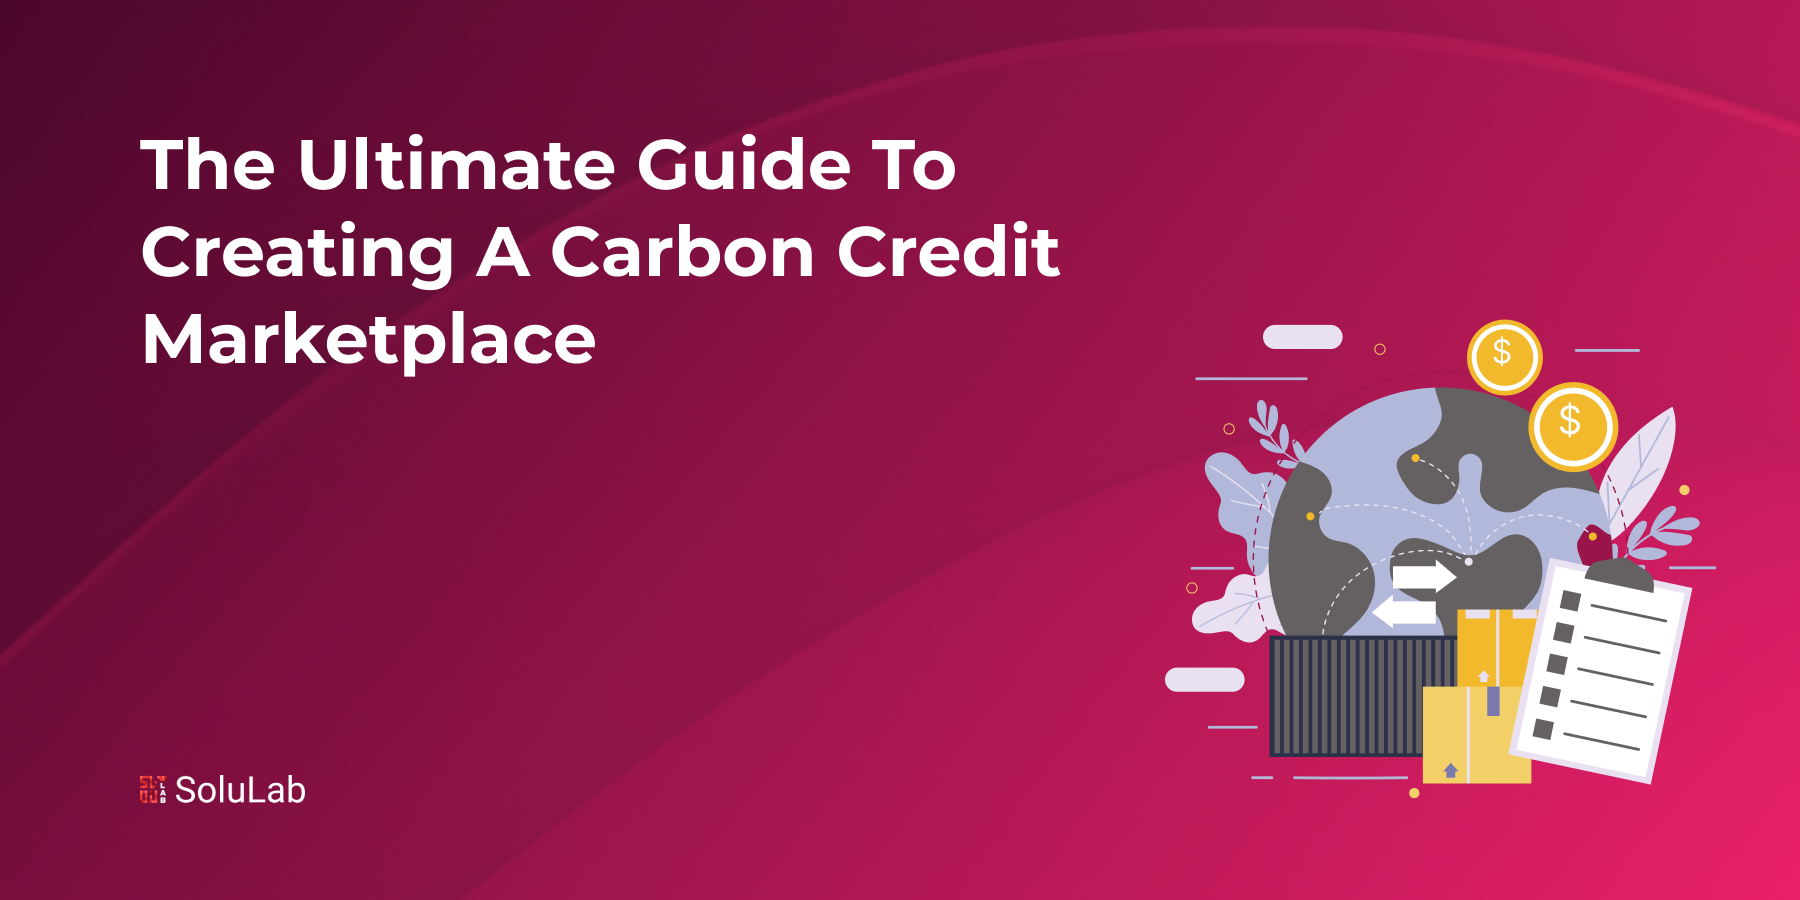 The Ultimate Guide To Creating a Carbon Credit Marketplace